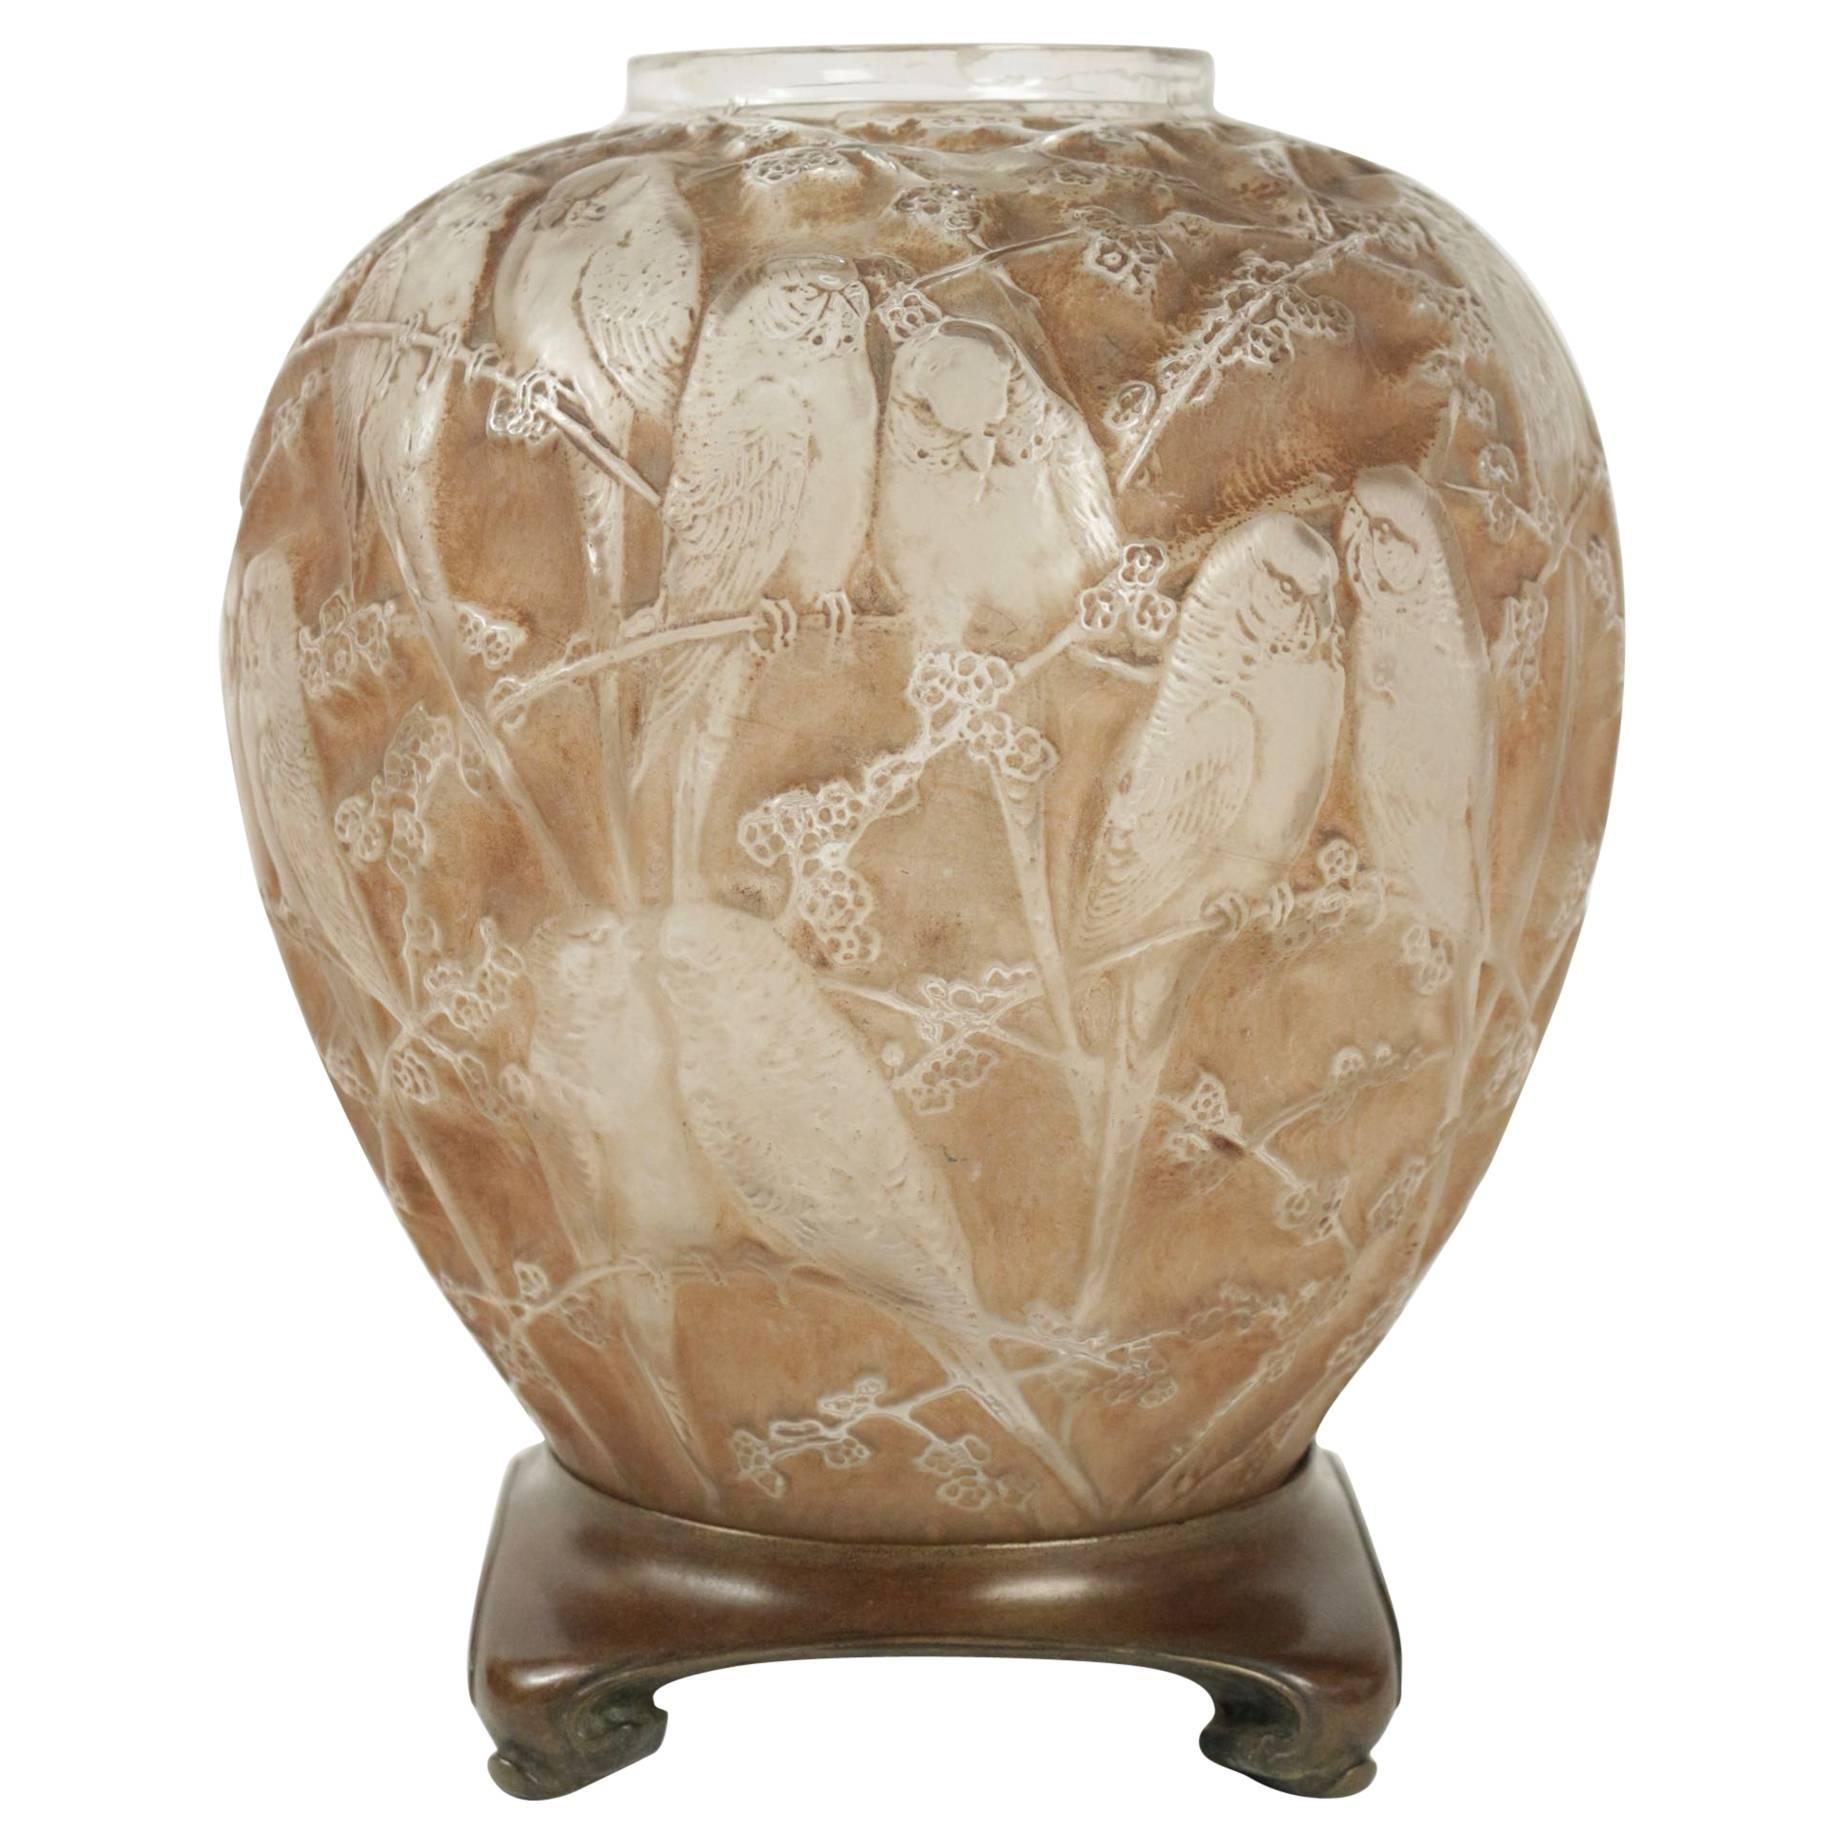 Rene Lalique Frosted and Sepia Stained Vase "Perruches"